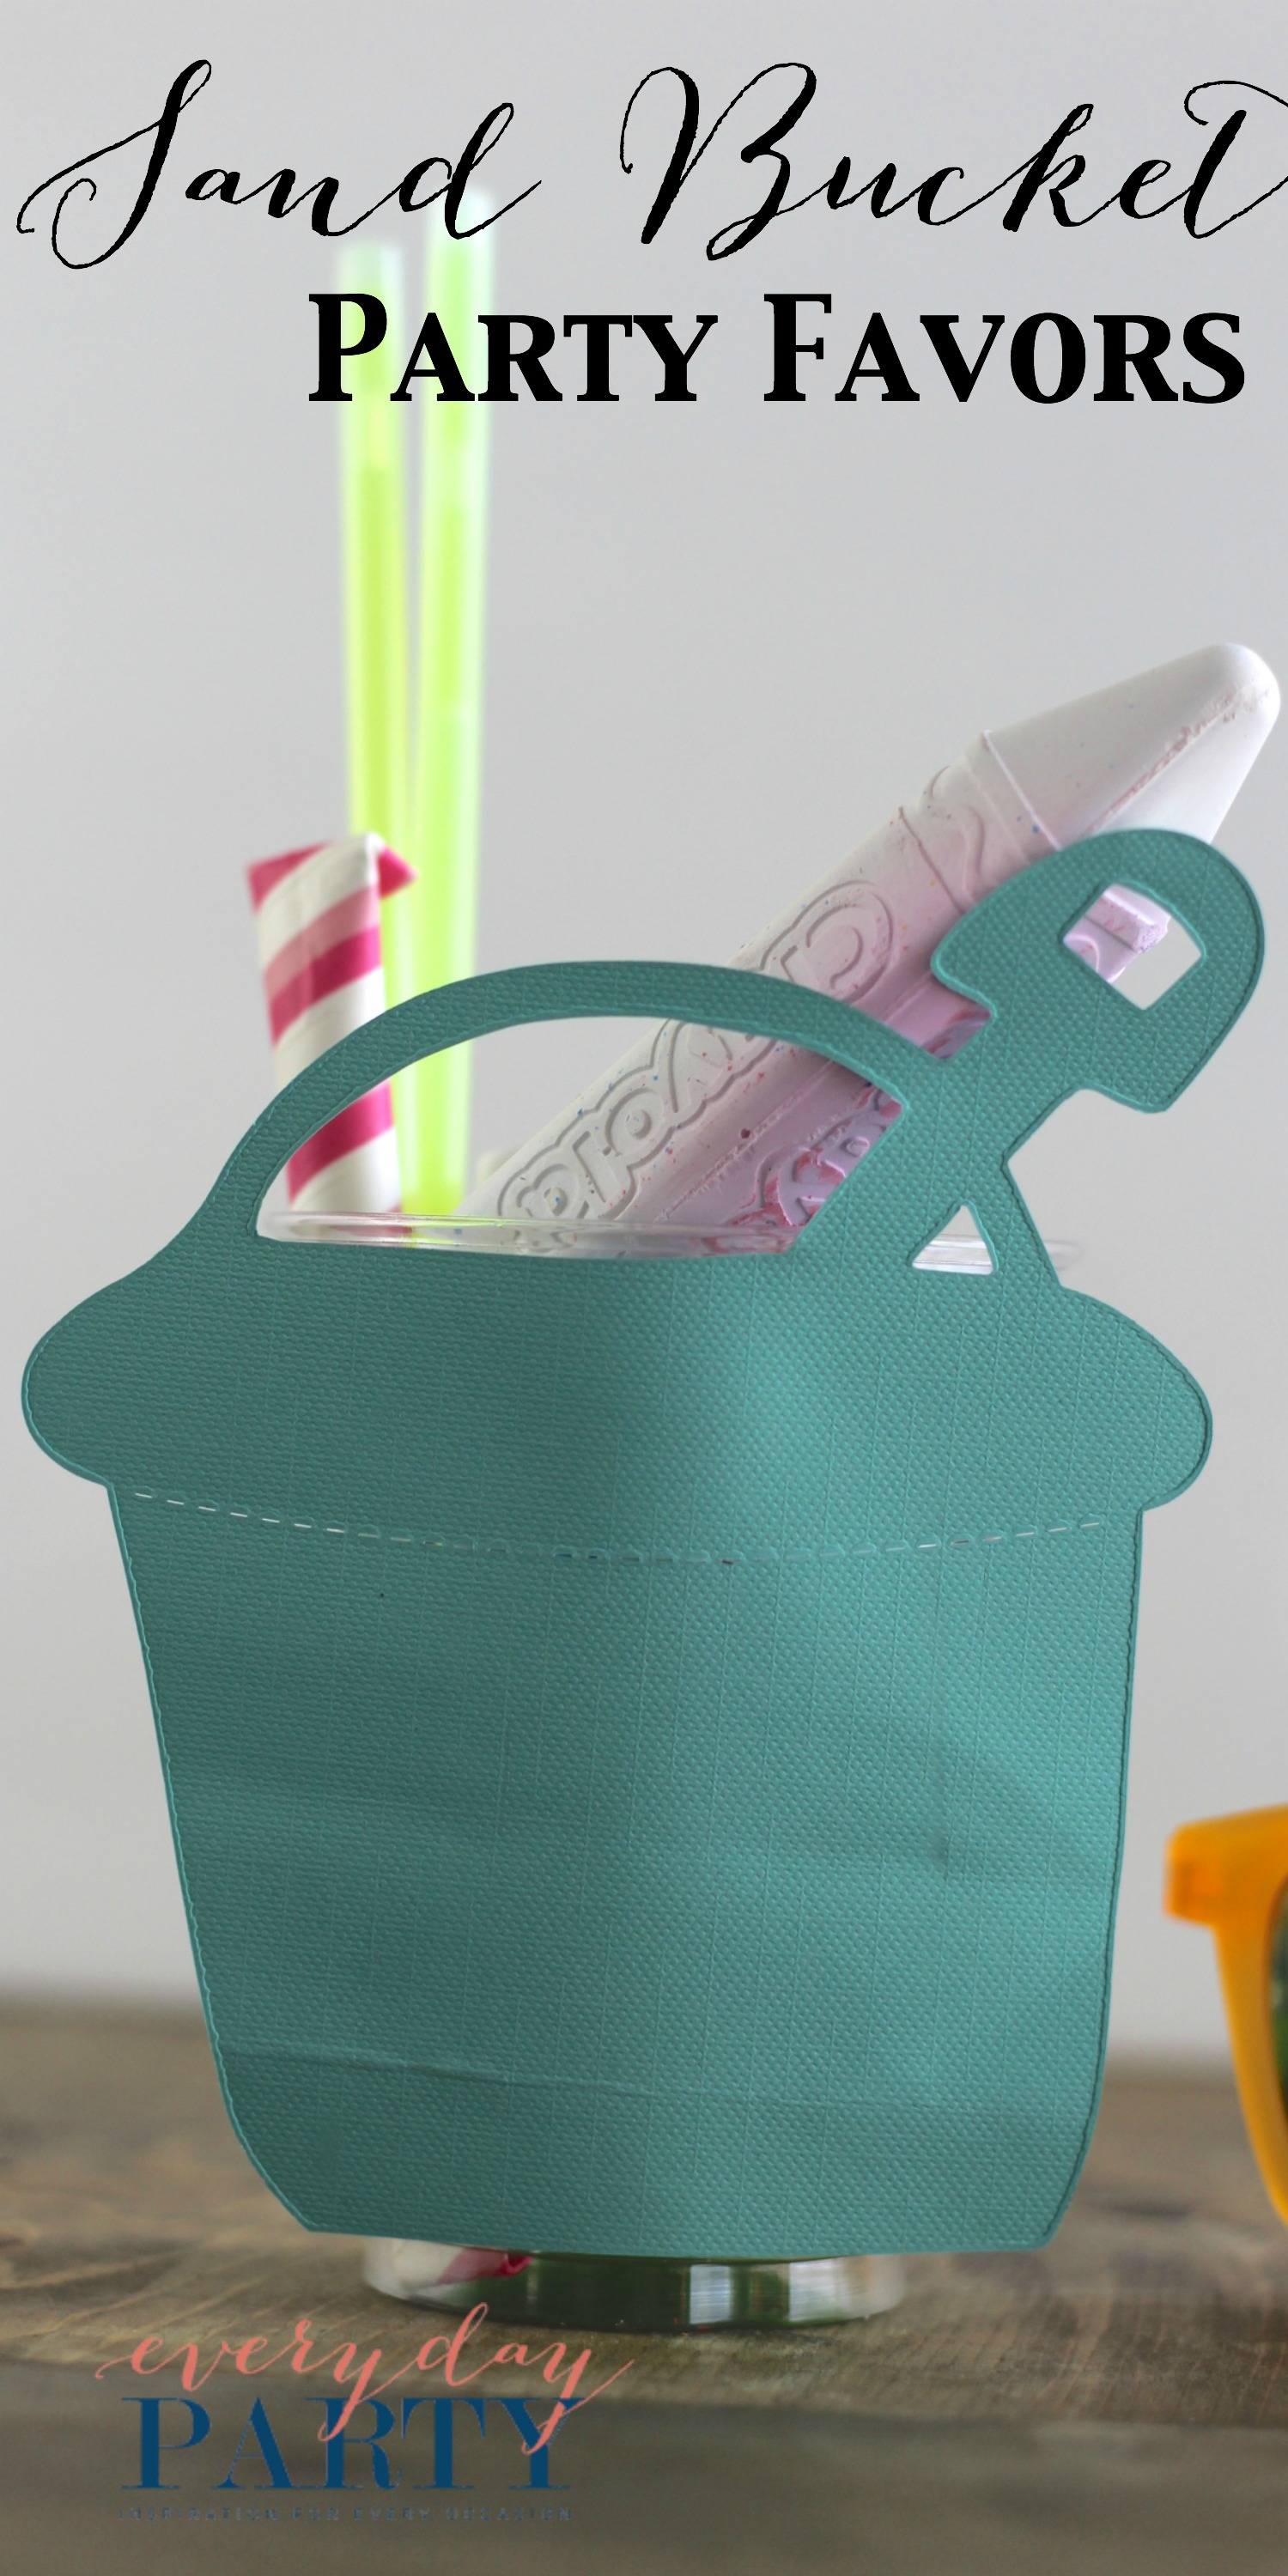 Everyday Party Magazine Sand Bucket Party Favors 